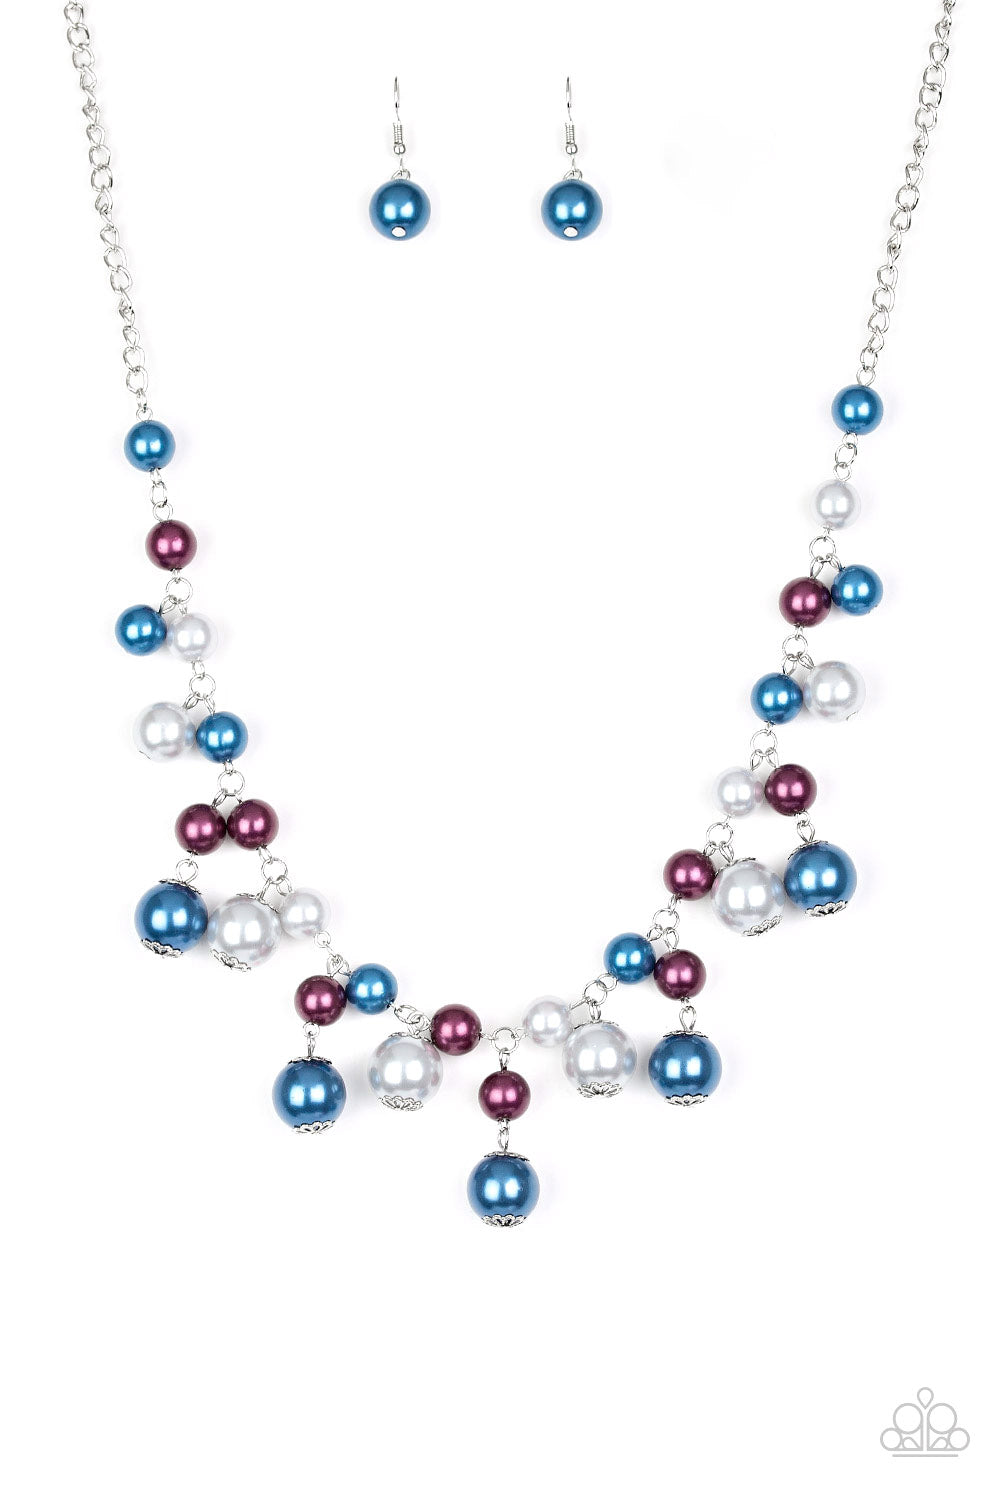 Soon To Be Mrs. Multi Necklace - Paparazzi Accessories  Varying in size, bubbly blue, purple, and silver pearls swing from the bottom of a classic strand of pearls, creating a refined fringe below the collar. Features an adjustable clasp closure.  All Paparazzi Accessories are lead free and nickel free!  Sold as one individual necklace. Includes one pair of matching earrings.